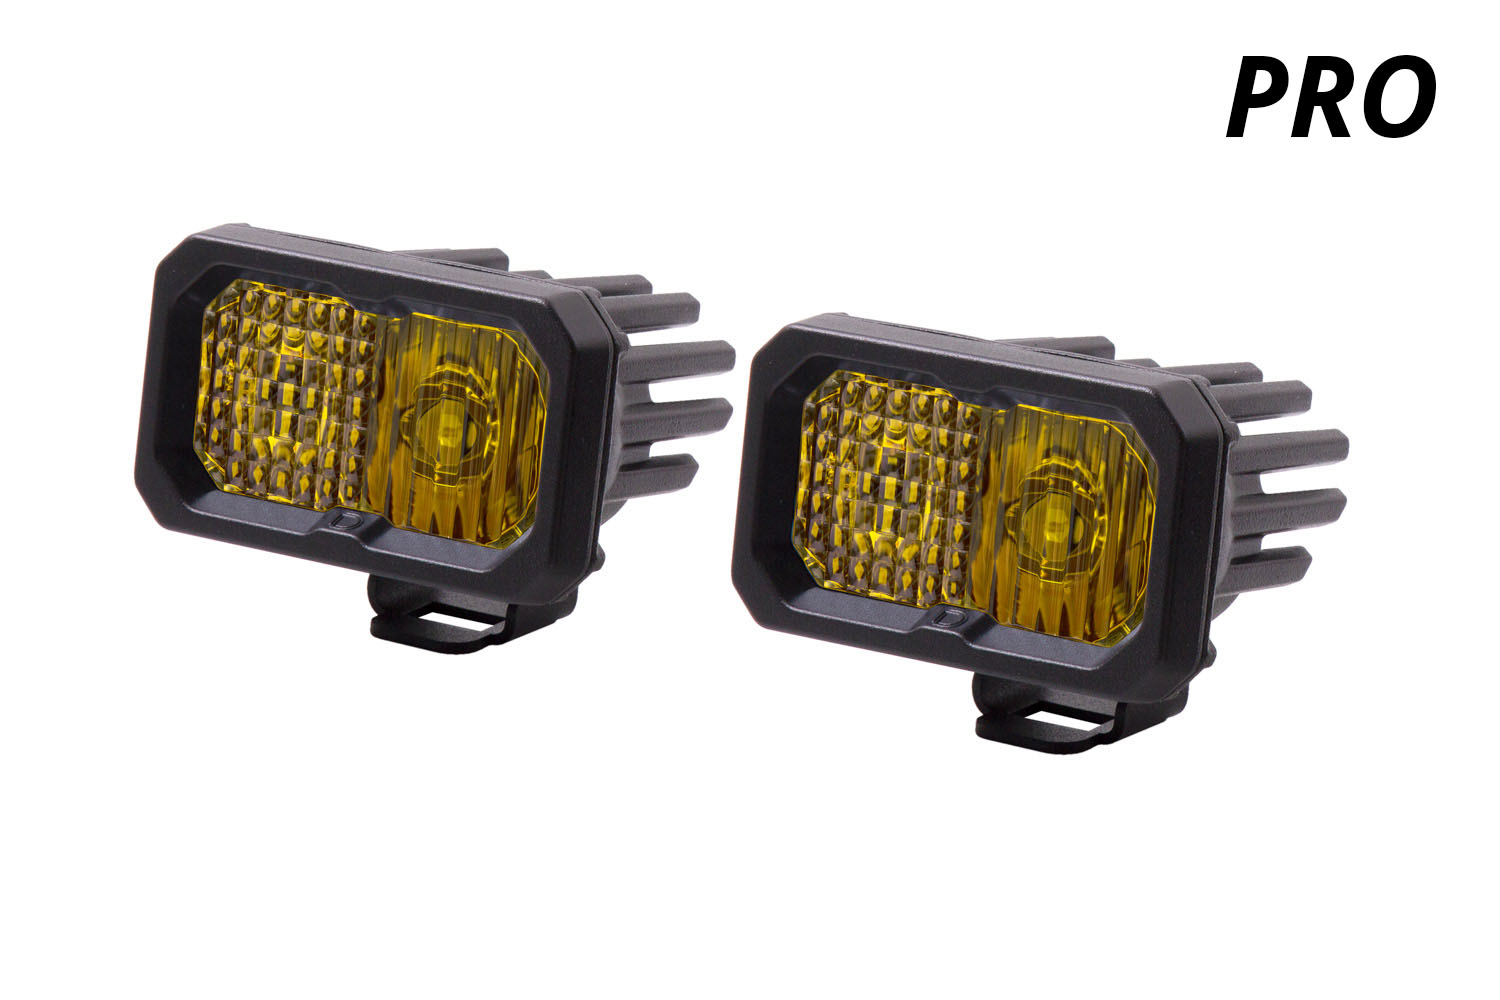 Diode Dynamics Stage Series 2 Inch LED Pod, Pro Yellow Combo Standard ABL Pair